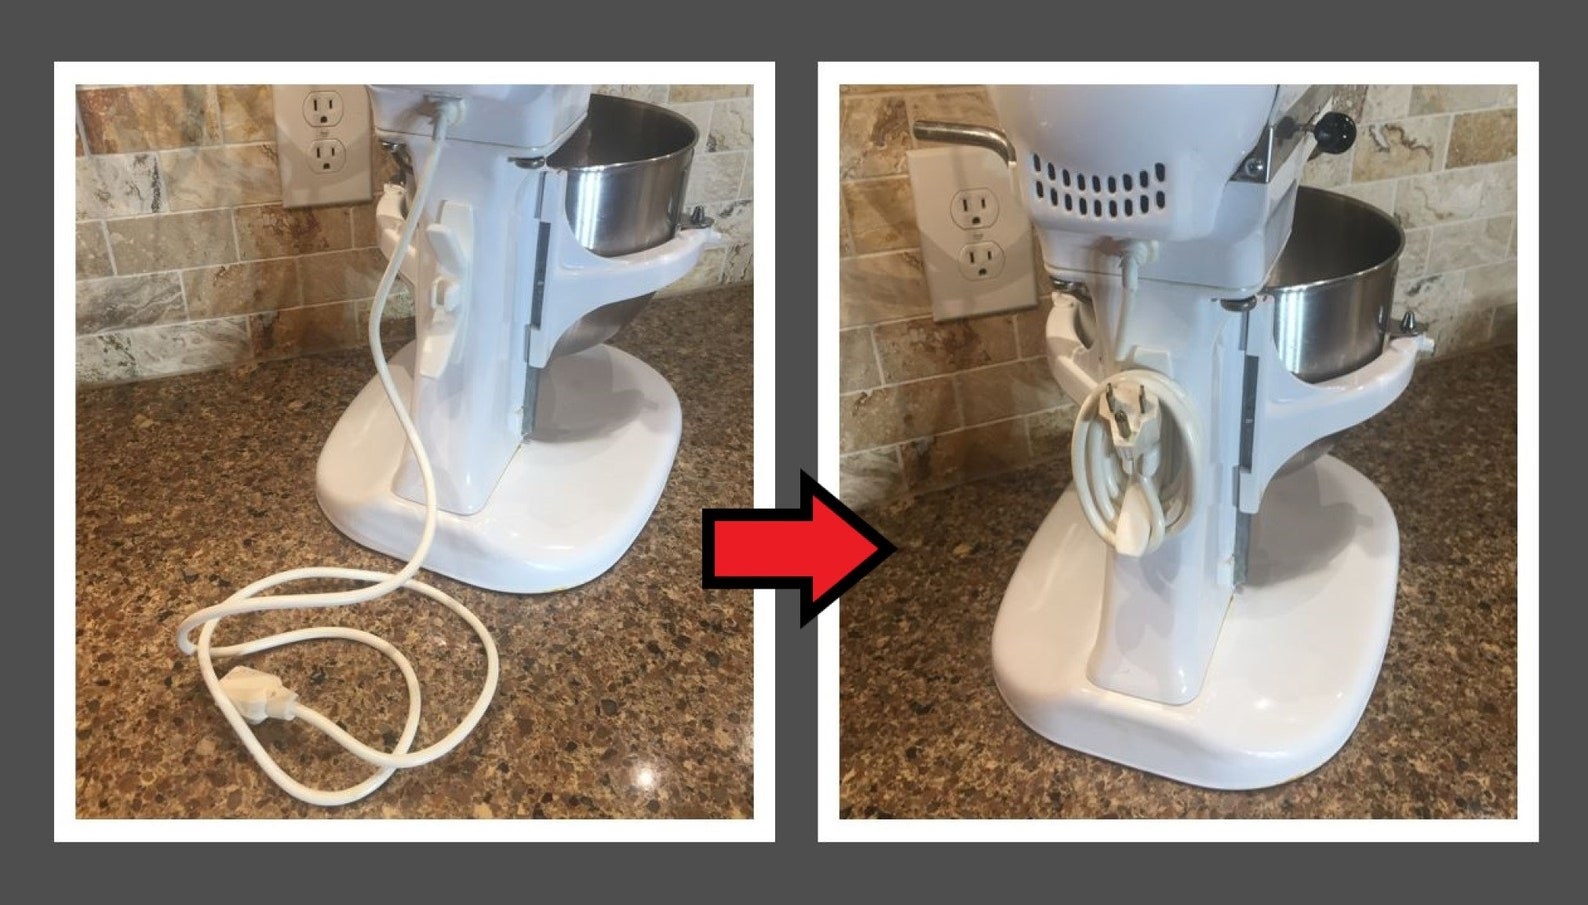 Before-and-after showing unorganized cord on the left and wrapped cord on the right using attachment